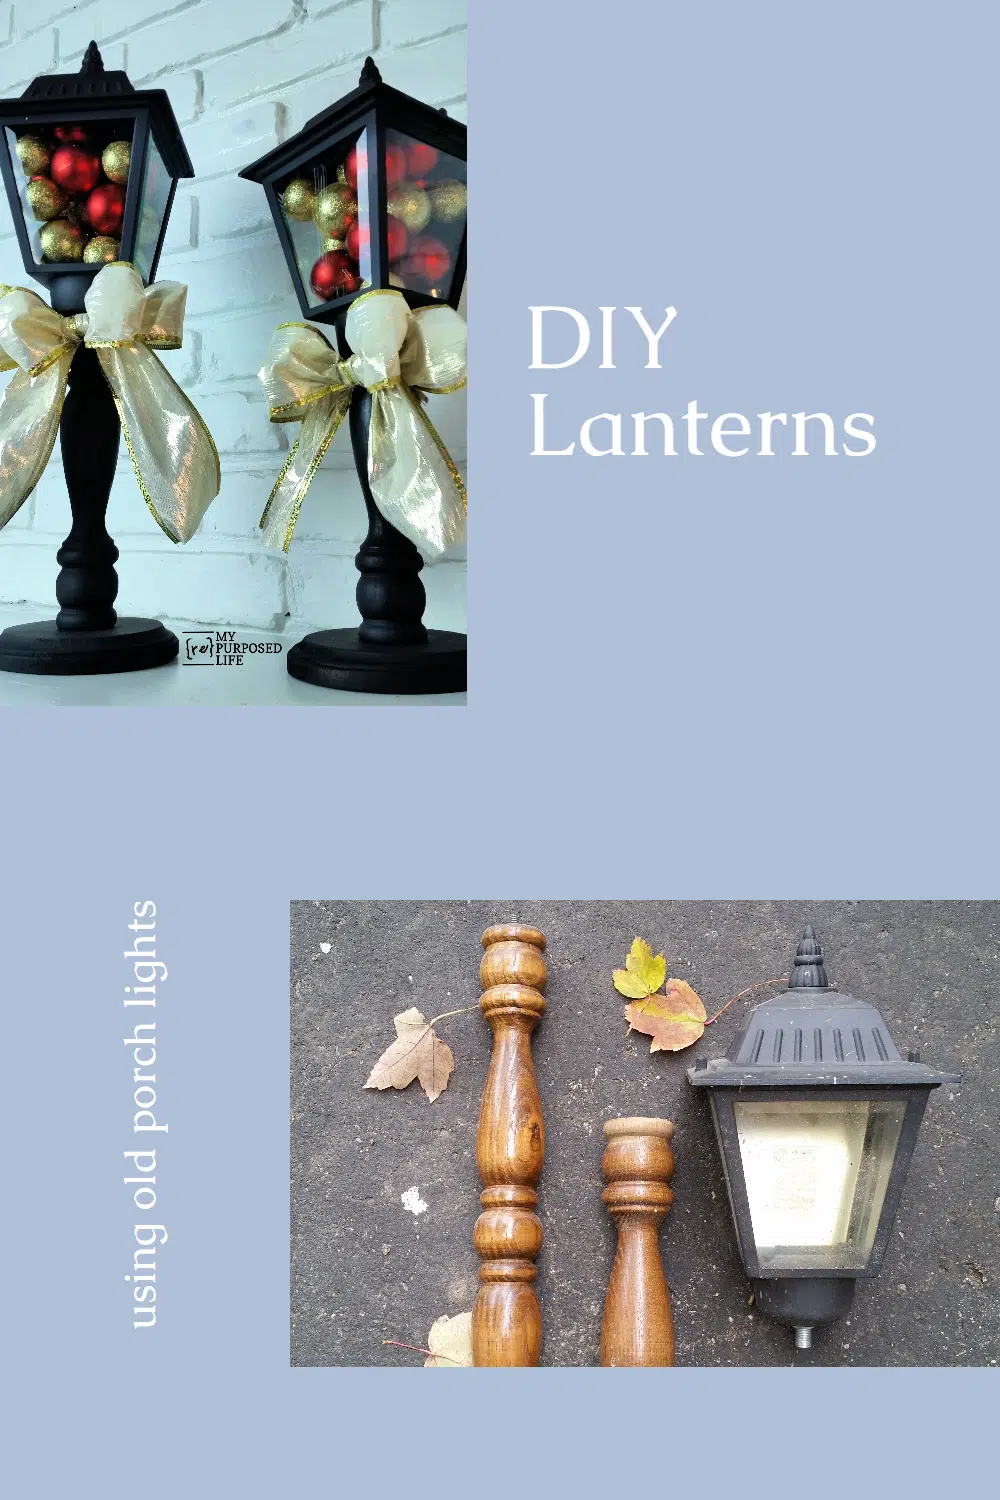 How to make diy Christmas Lanterns using old porch lights, spindles, and wooden bases. Easy weekend project to make for your holiday table or mantel. #MyRepurposedLife #repurposed #porch #lights #Christmas #lanterns via @repurposedlife